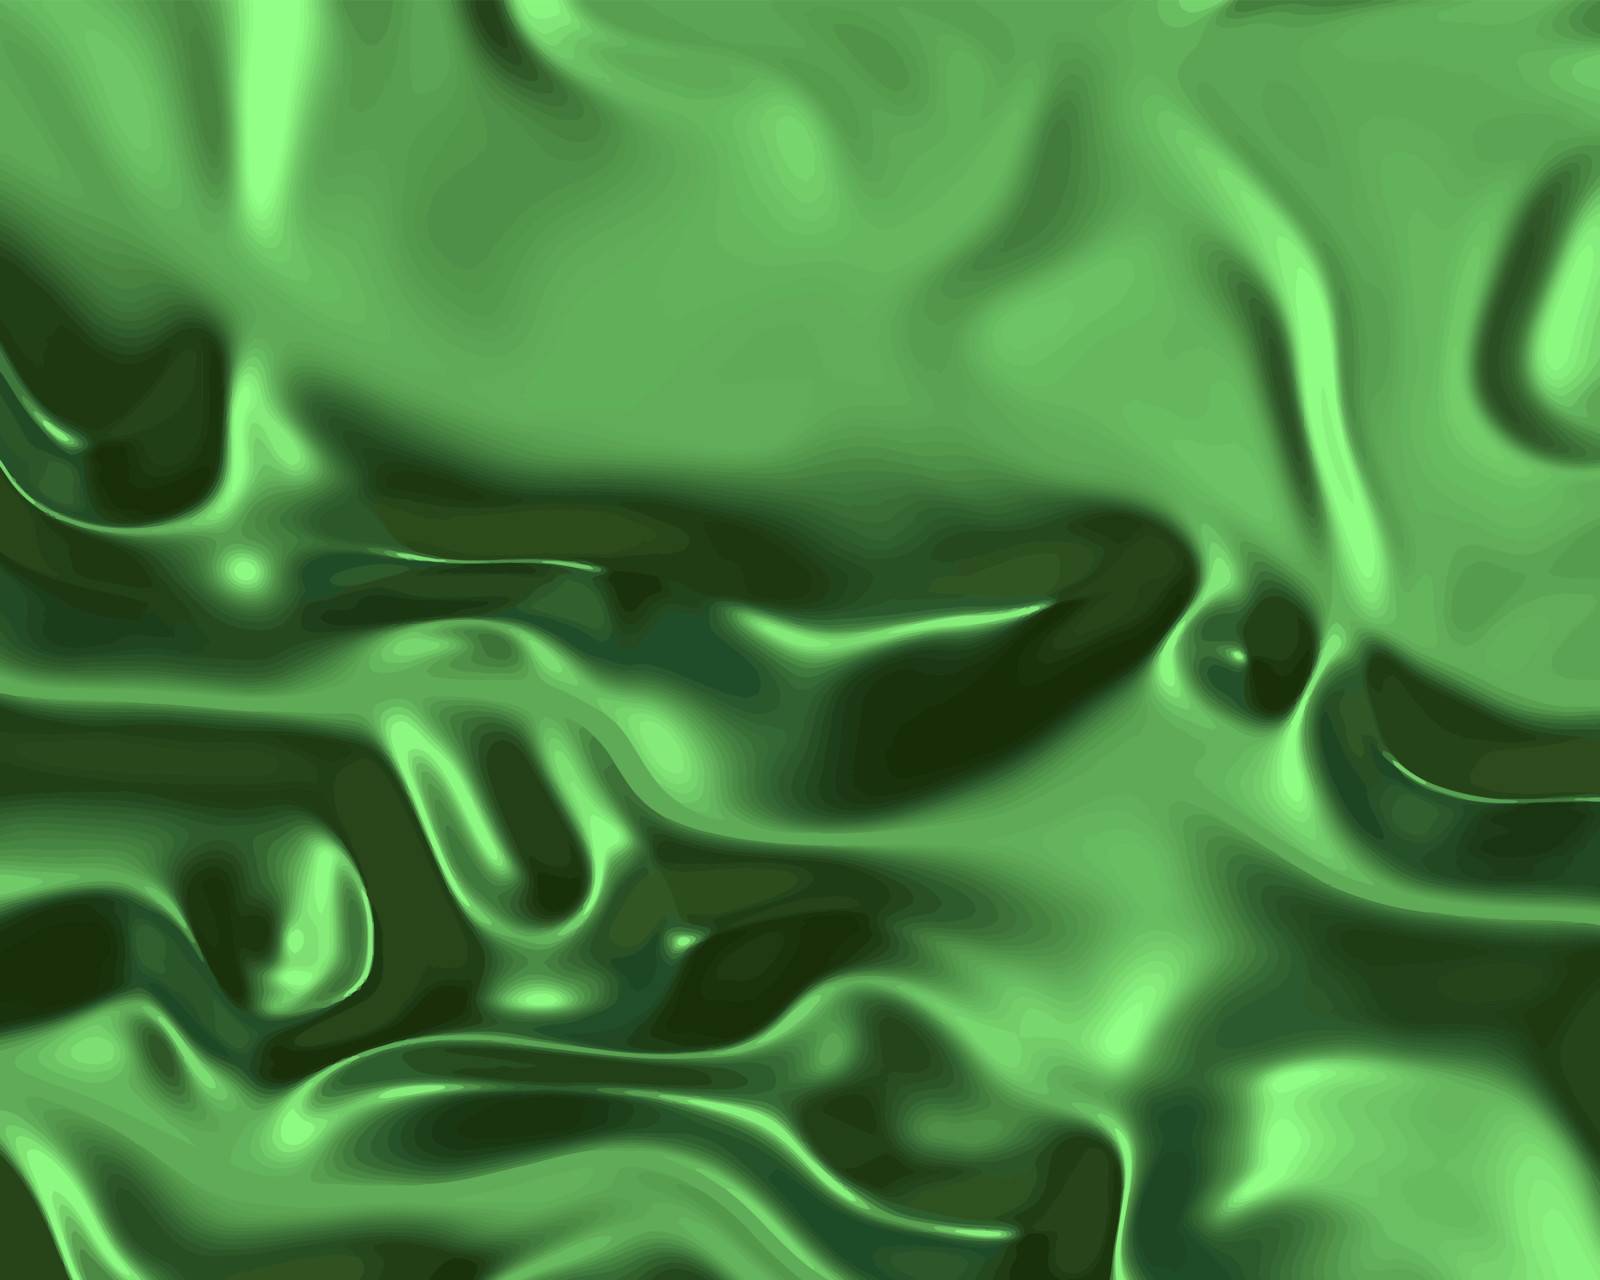 image of luxurious flowing silk or satin fabric in deep green